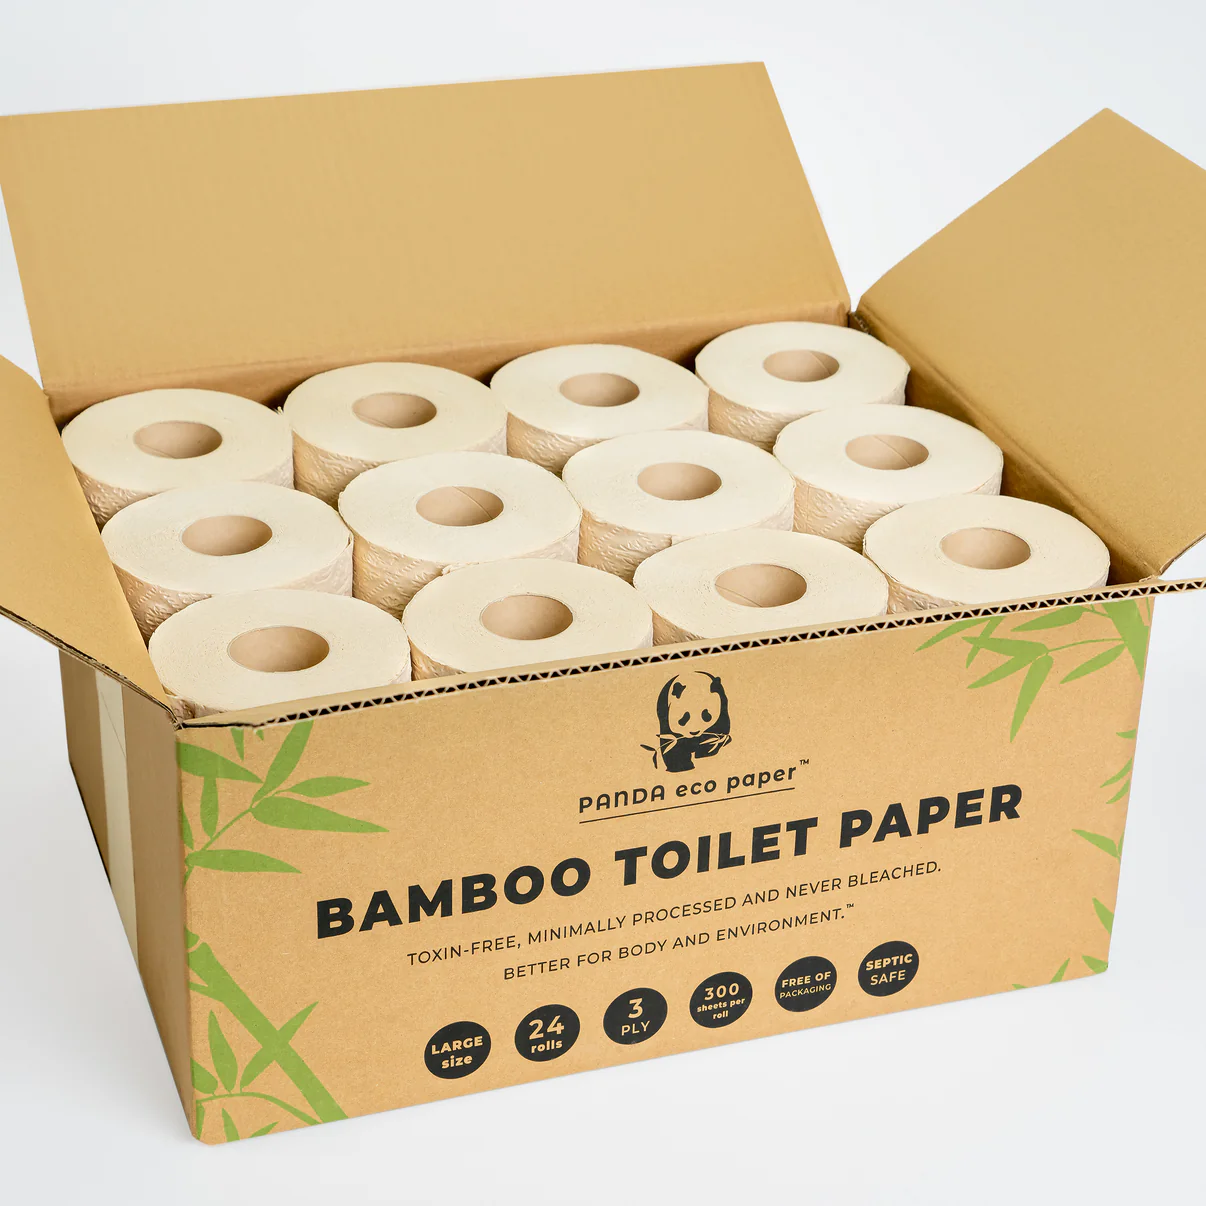 Rustic Strength Organic Bamboo Toilet Paper review and promo code